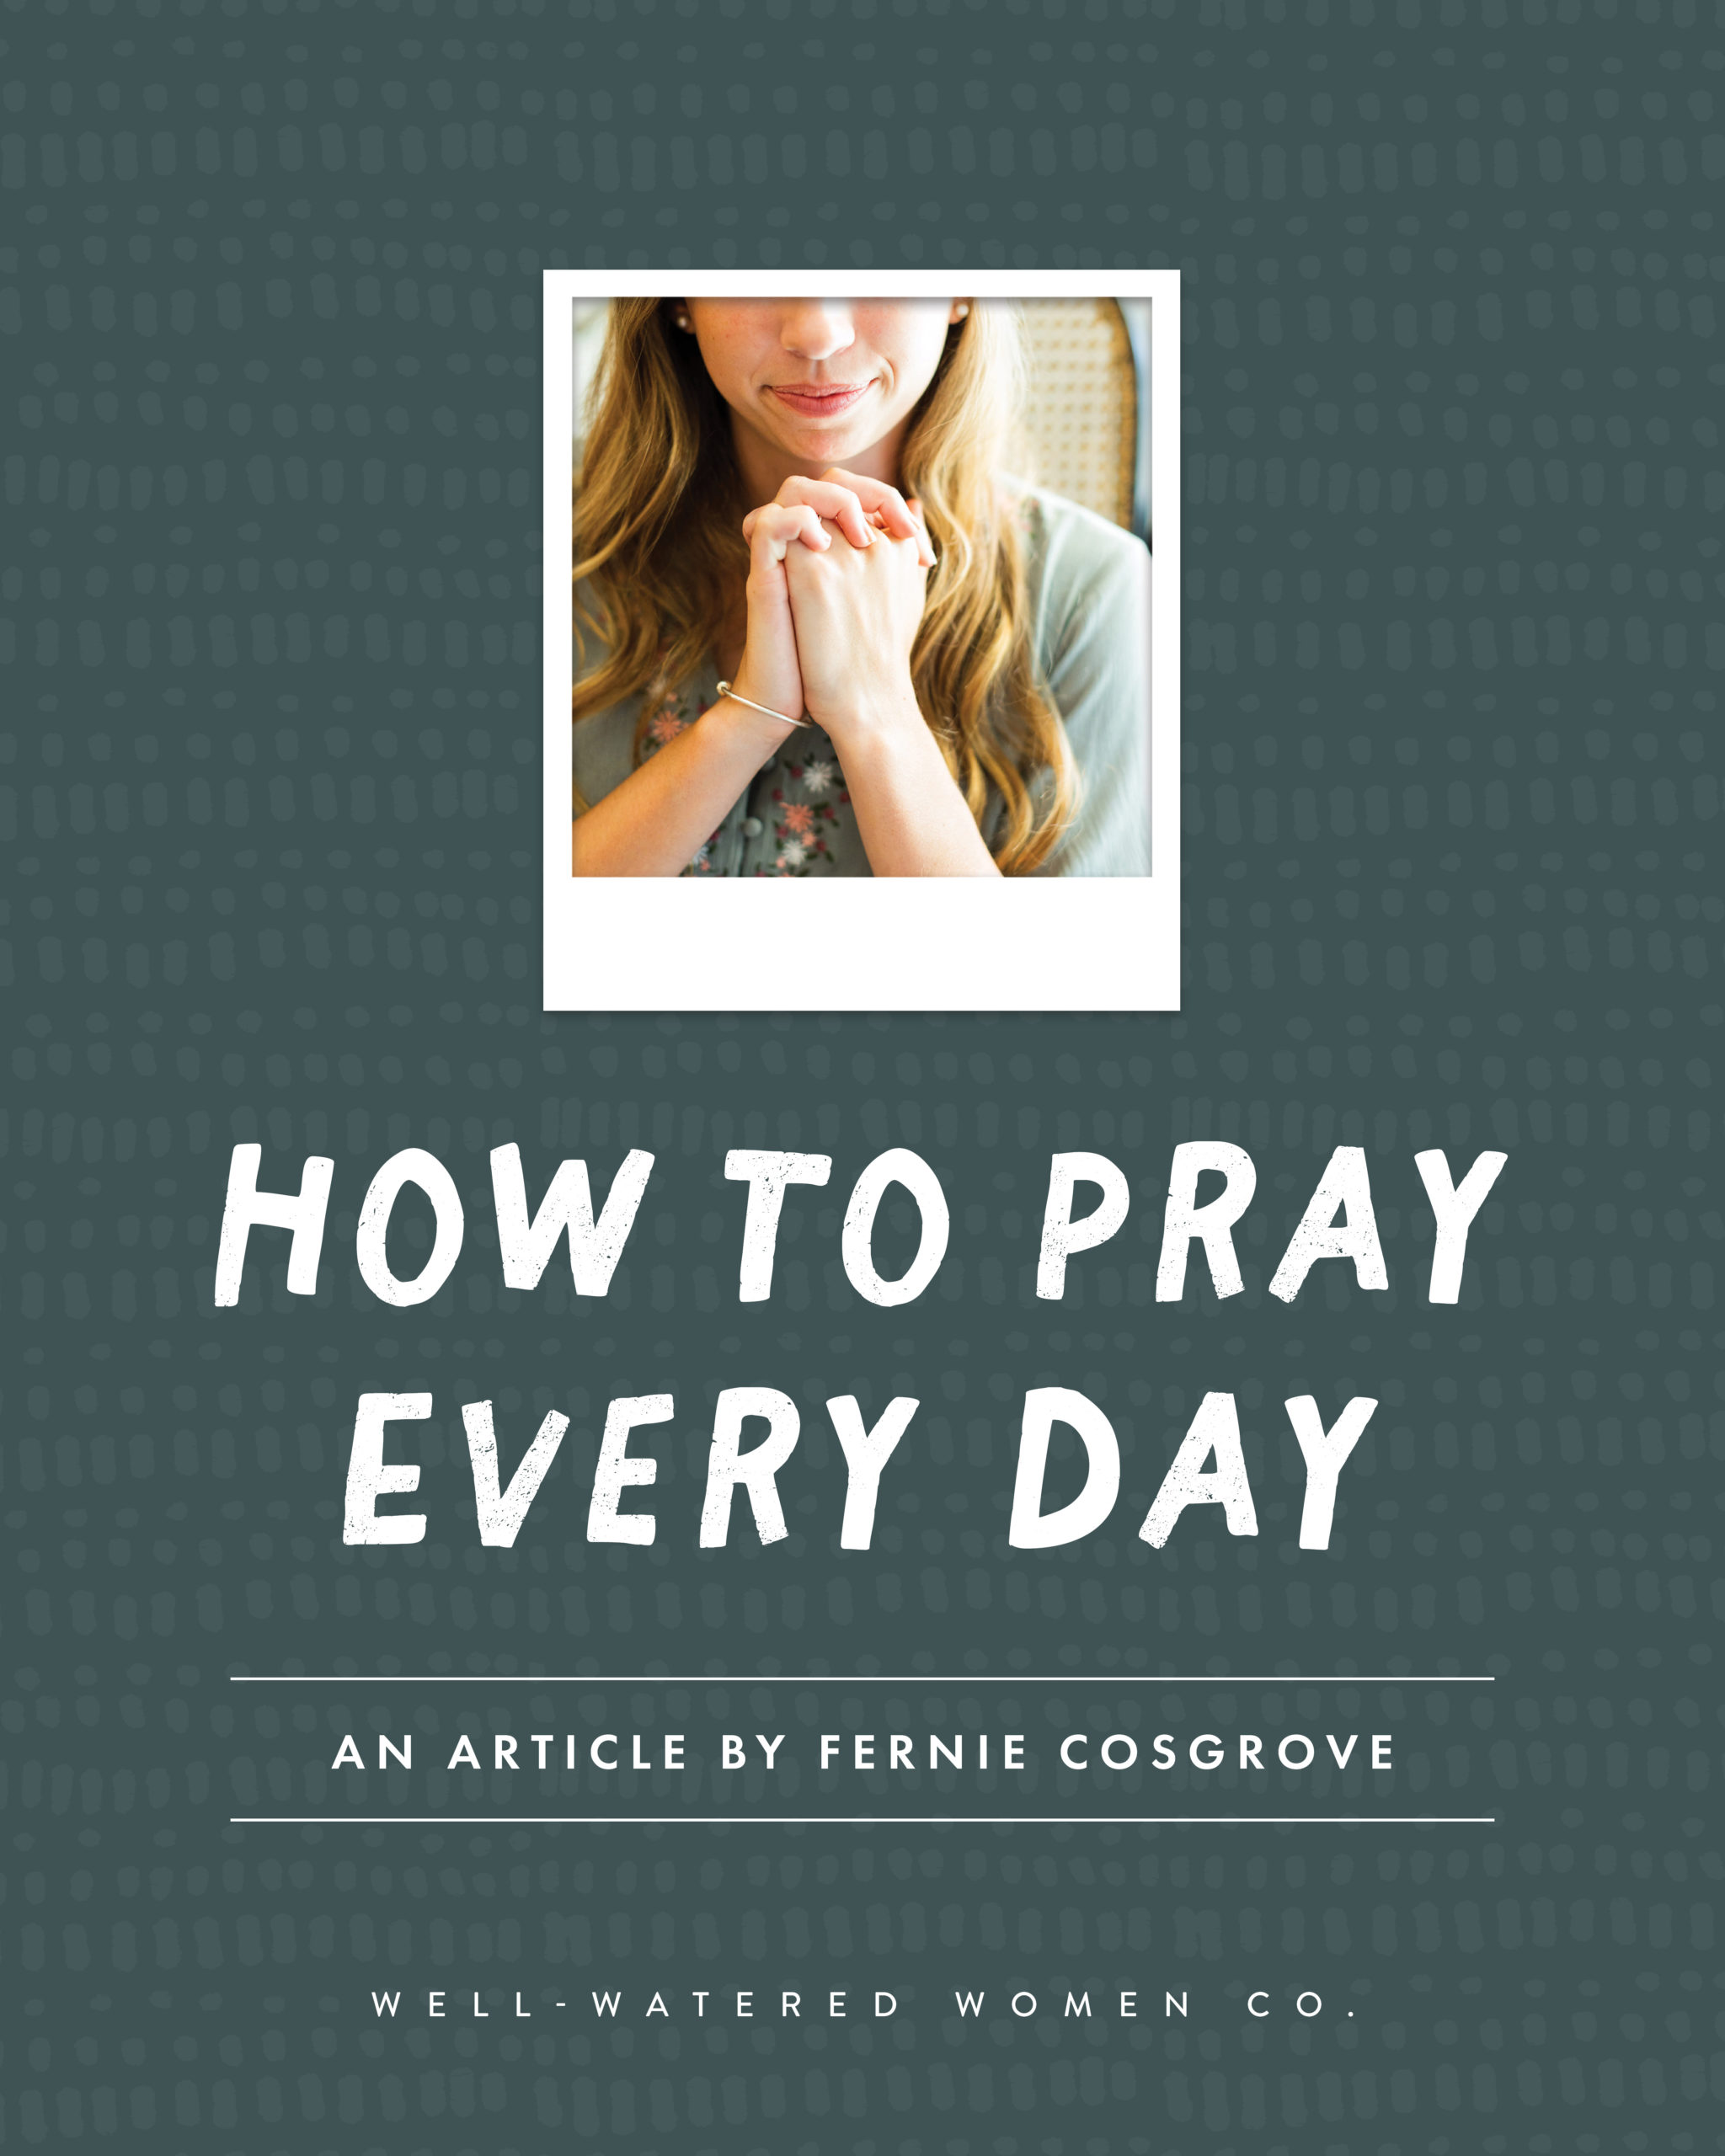 How to Pray Every Day - an article from Well-Watered Women